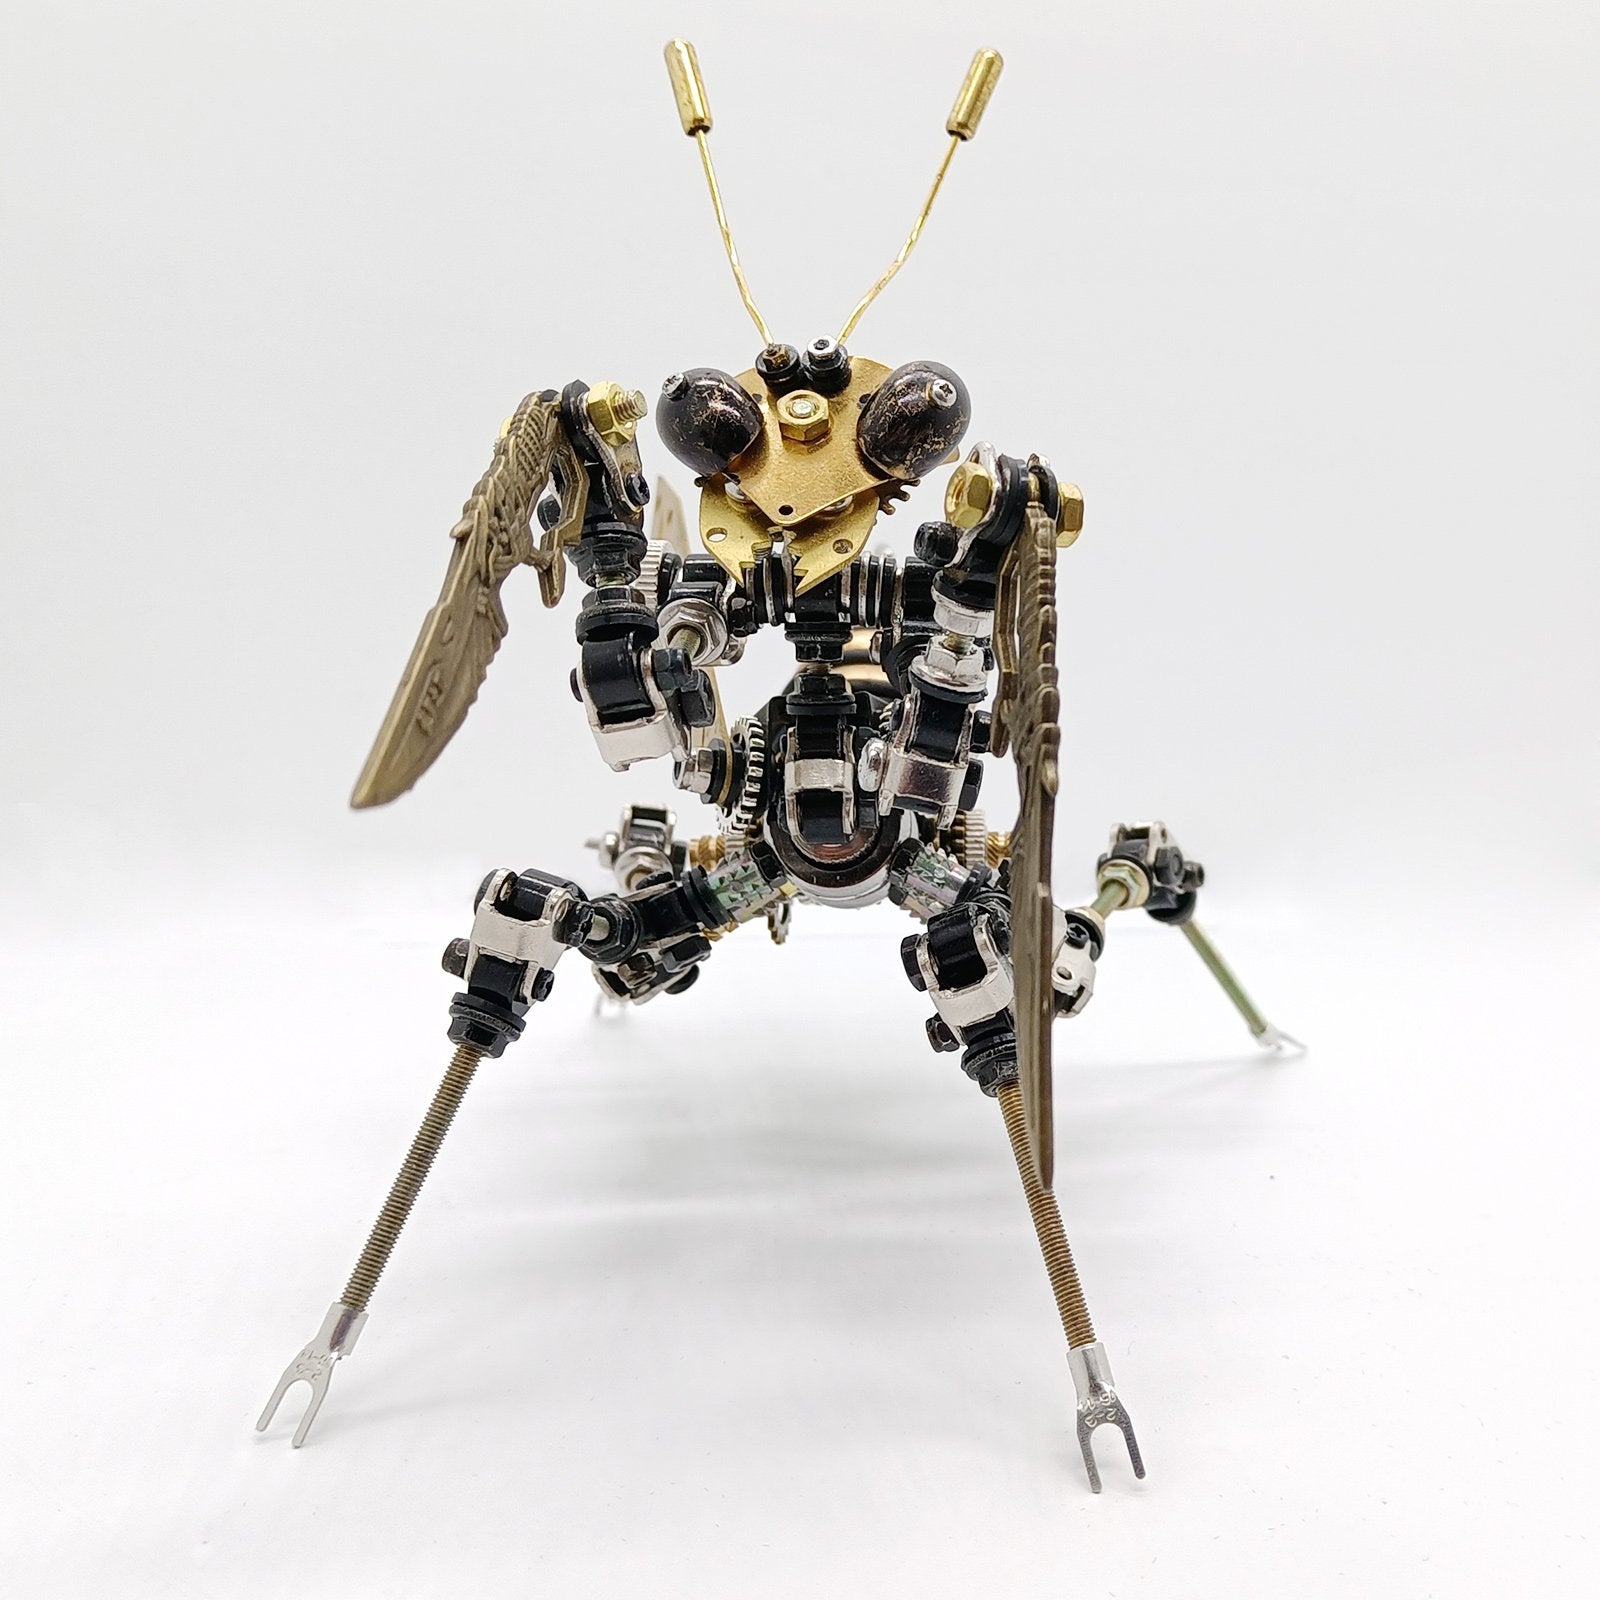 3D Metal Assembly DIY Mechanical Mantis Insect Model Puzzle kit